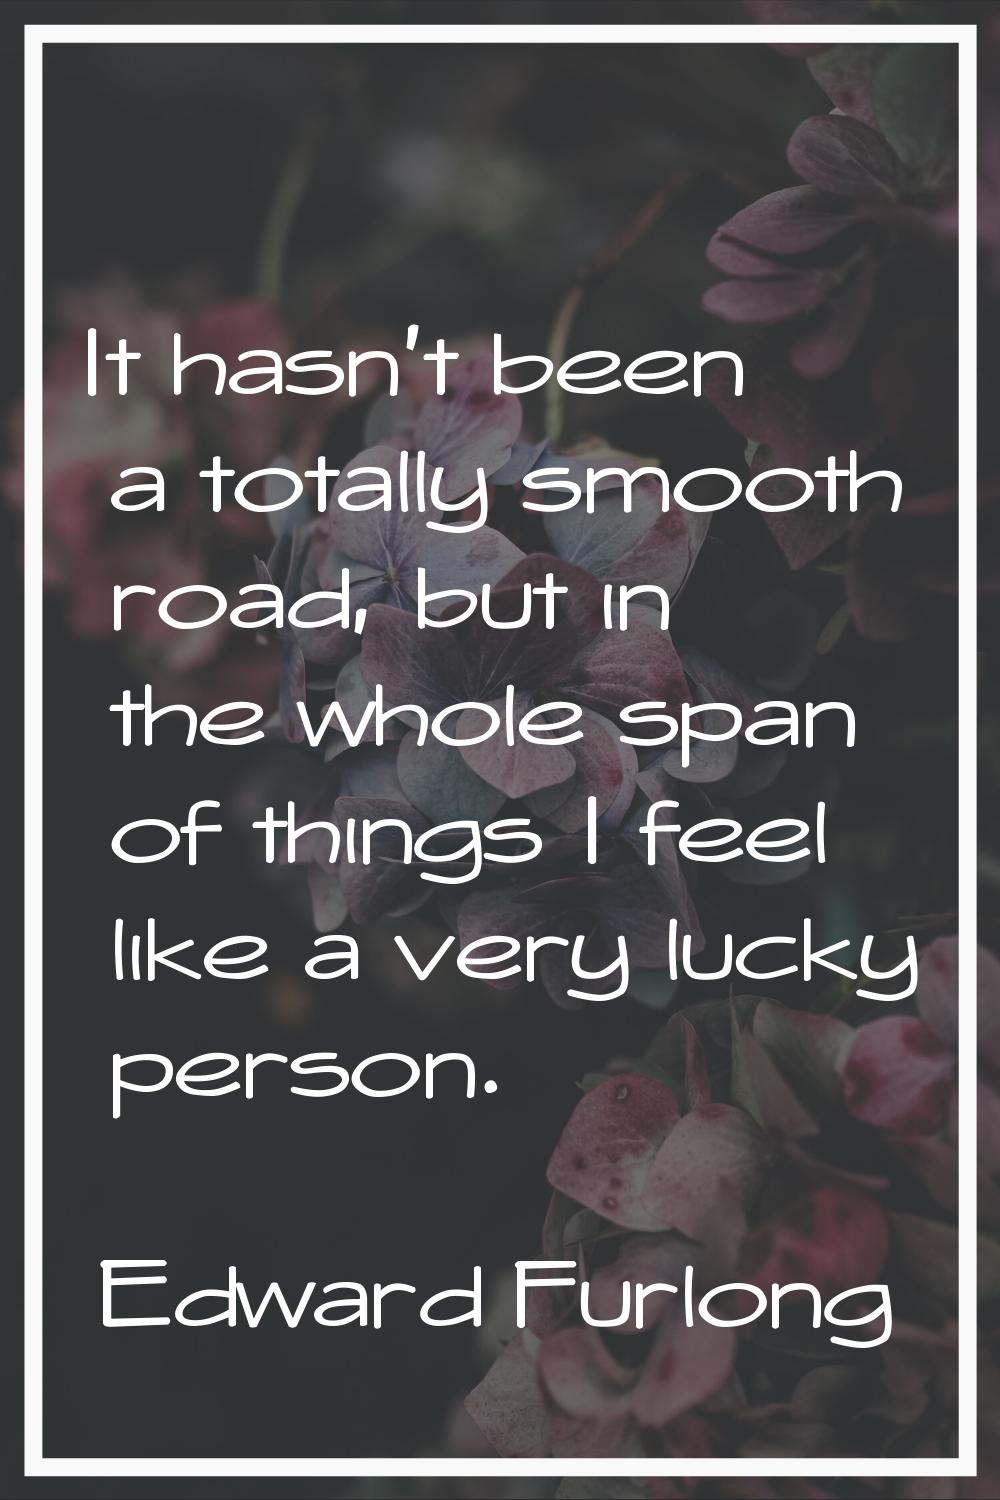 It hasn't been a totally smooth road, but in the whole span of things I feel like a very lucky pers